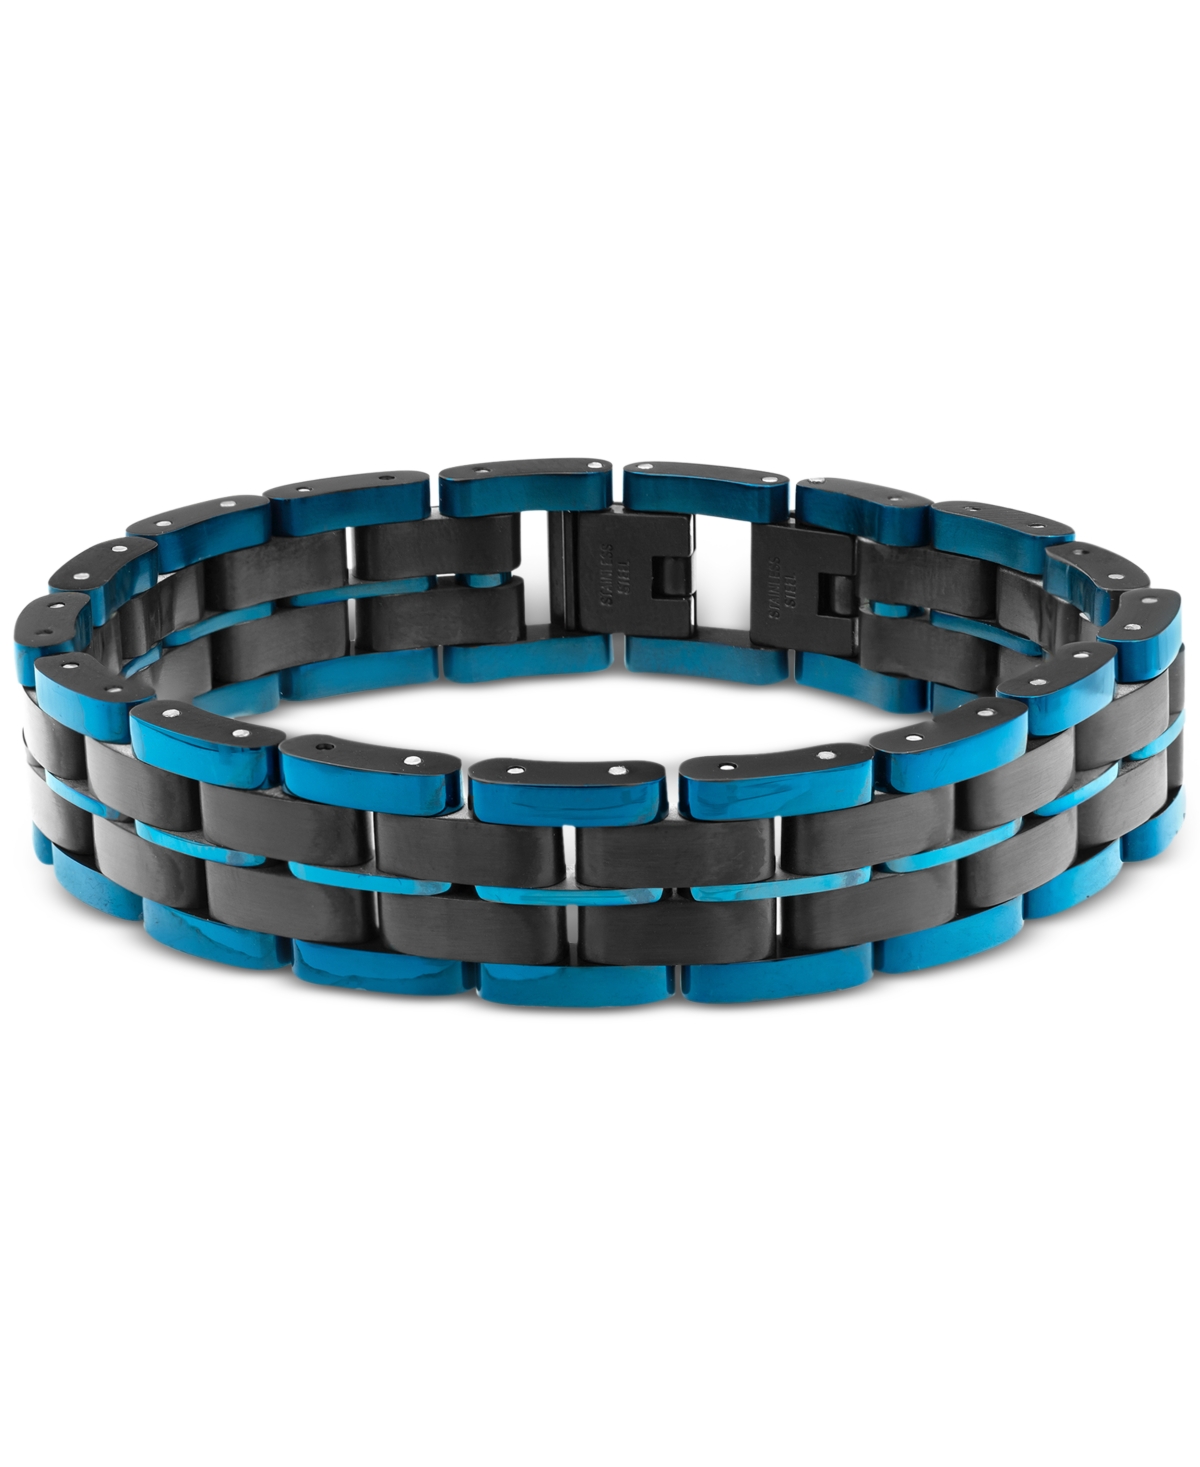 Men's Watch Link Bracelet in Blue and Black Ion-Plated Stainless Steel - Blue/Black